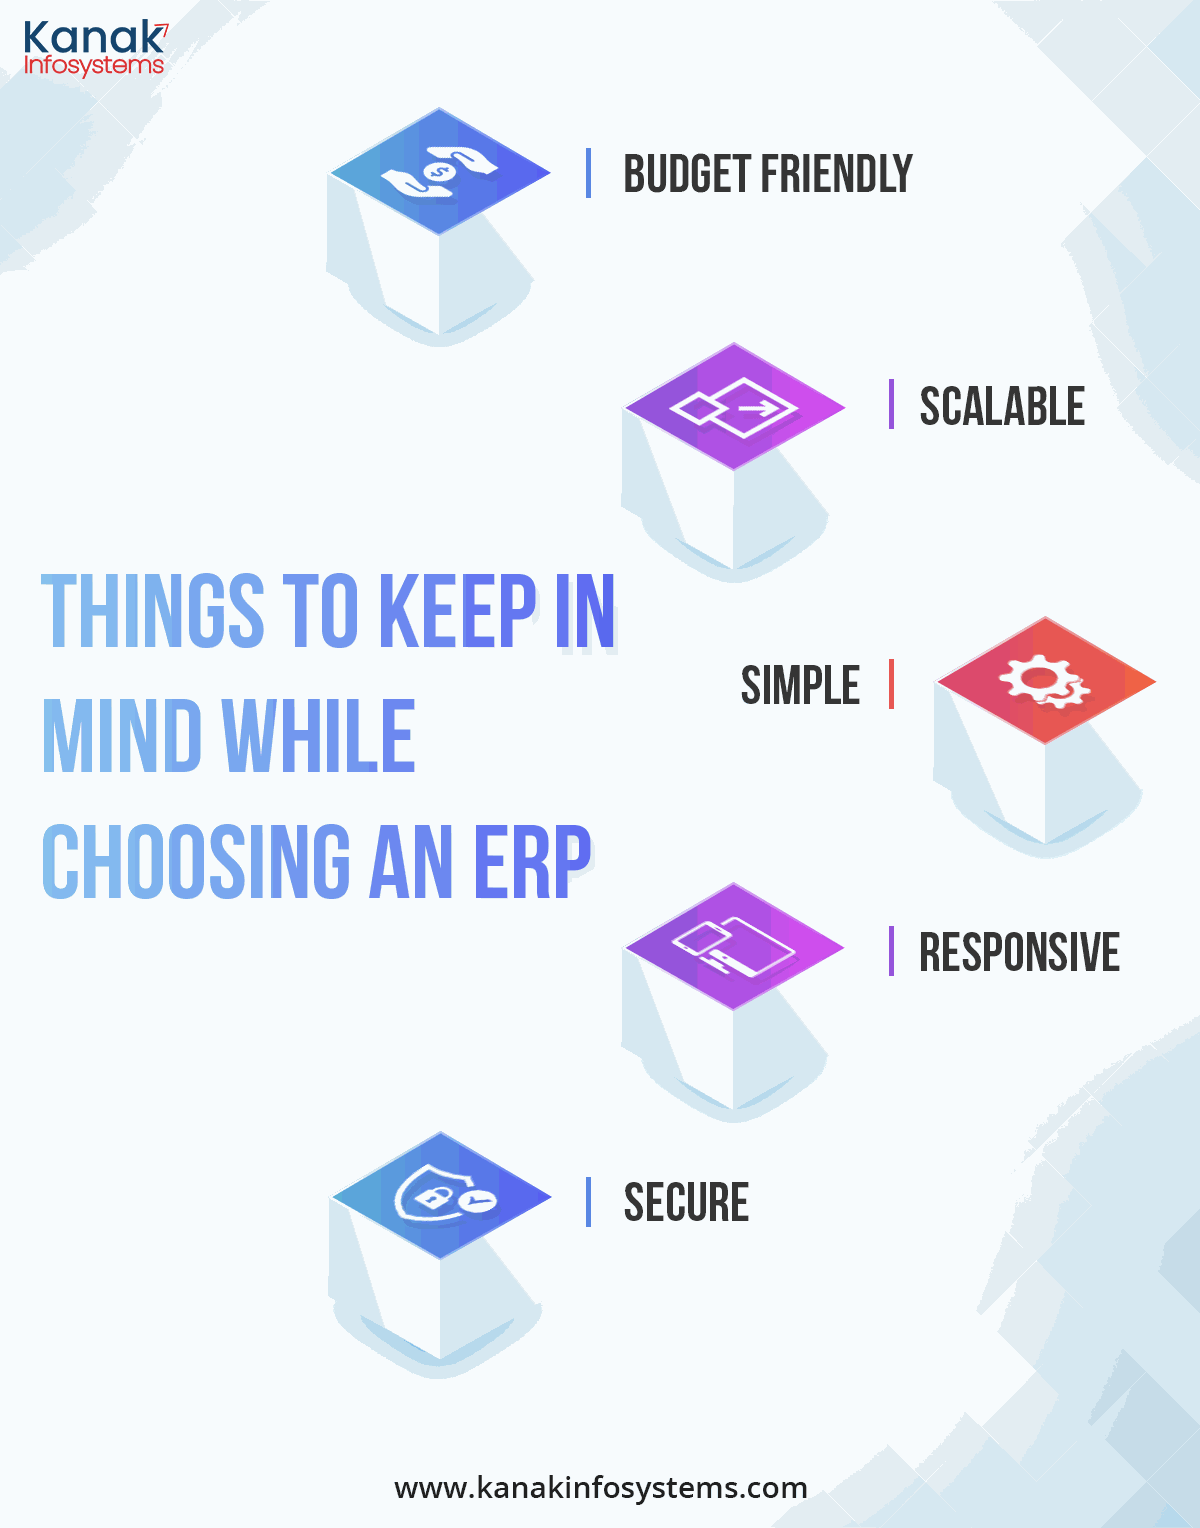 Things to keep in mind while choosing an ERP